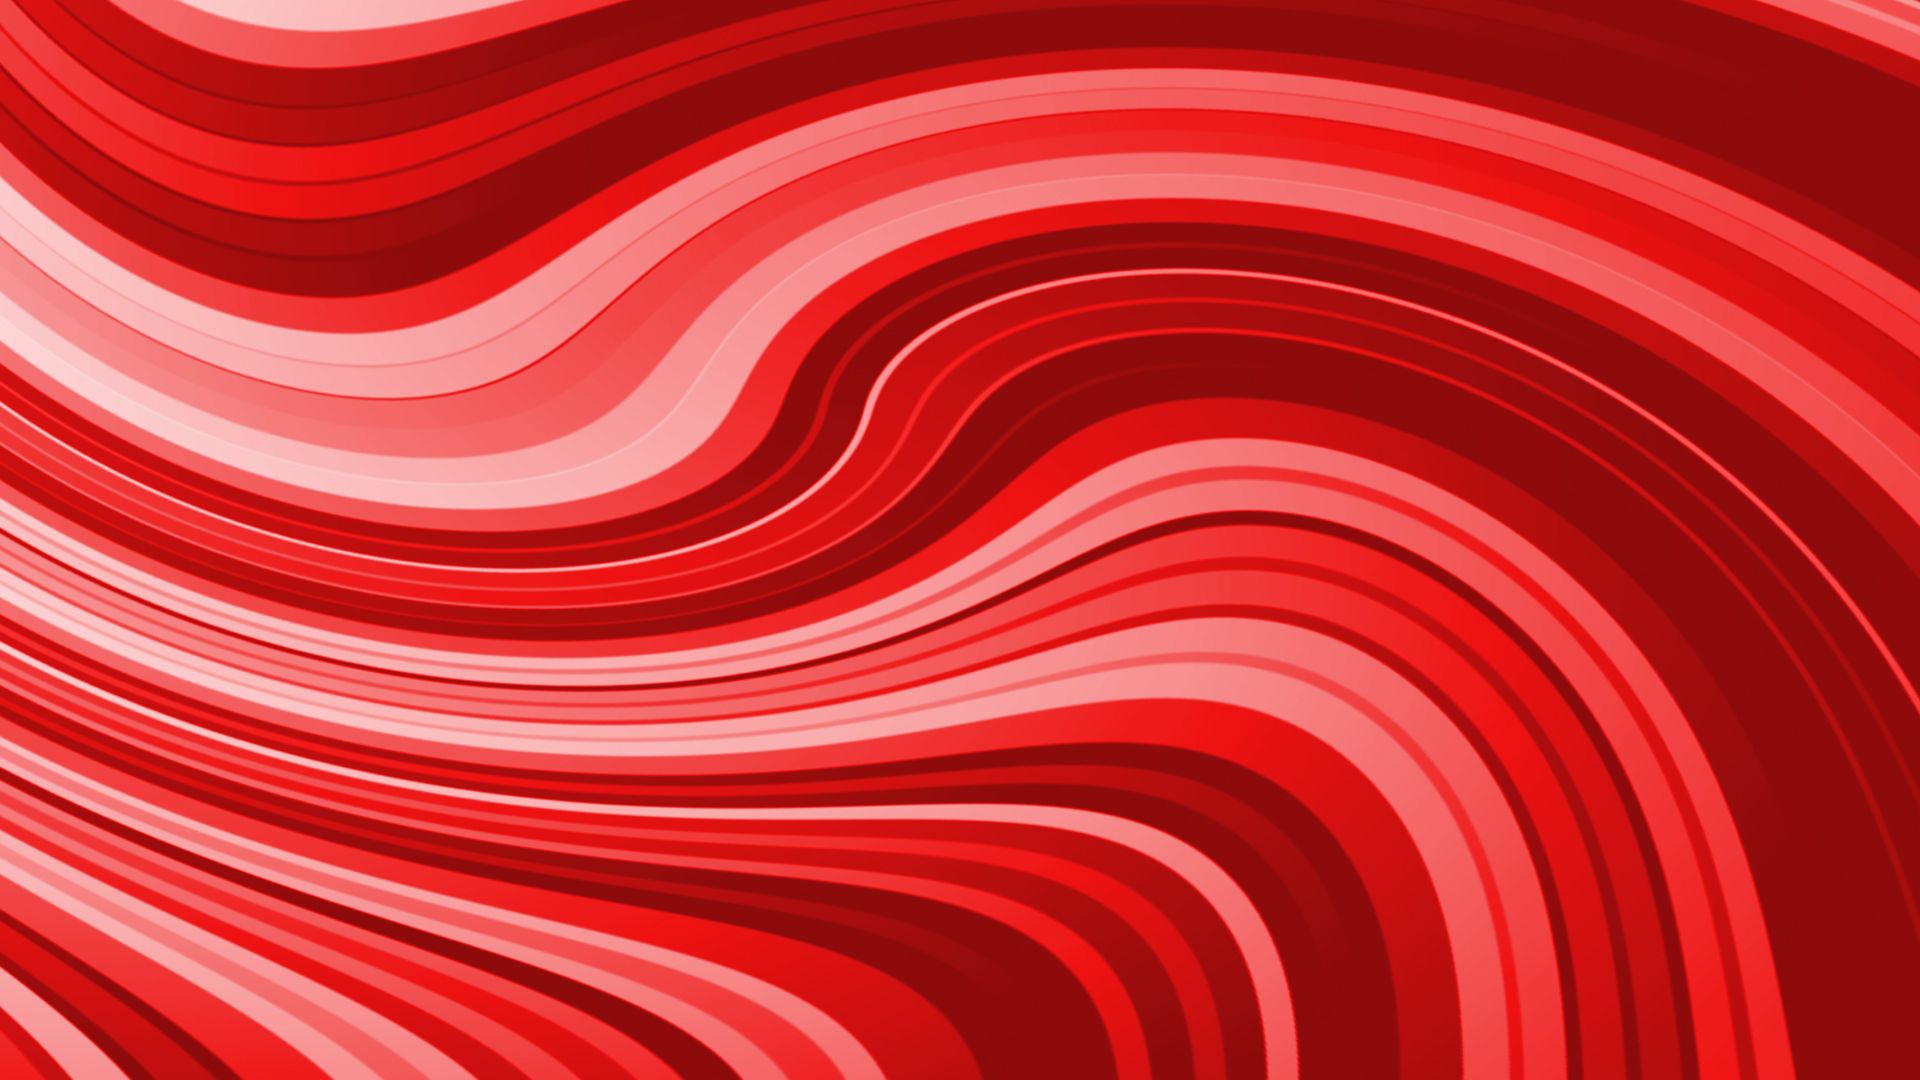 A red and white abstract background - Red, wave